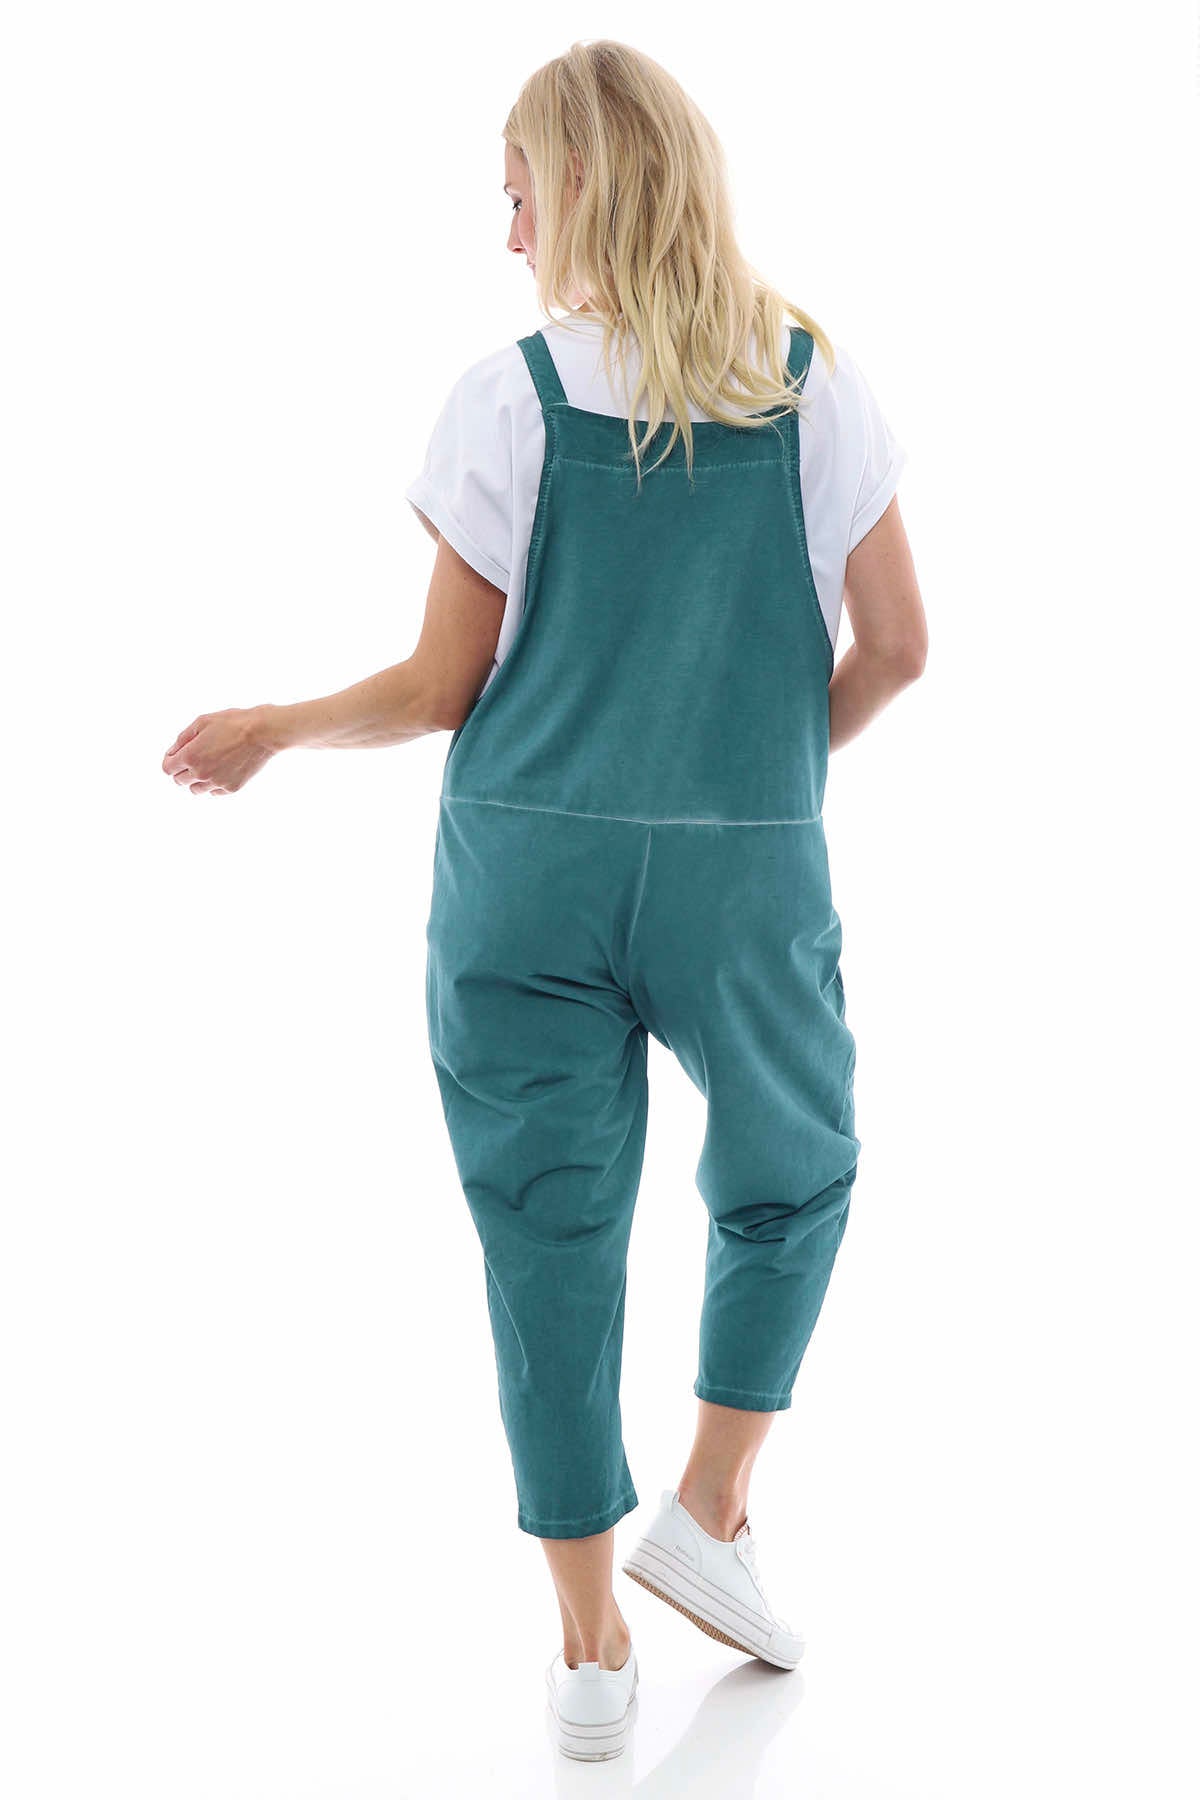 Pabo Washed Cotton Dungarees Teal